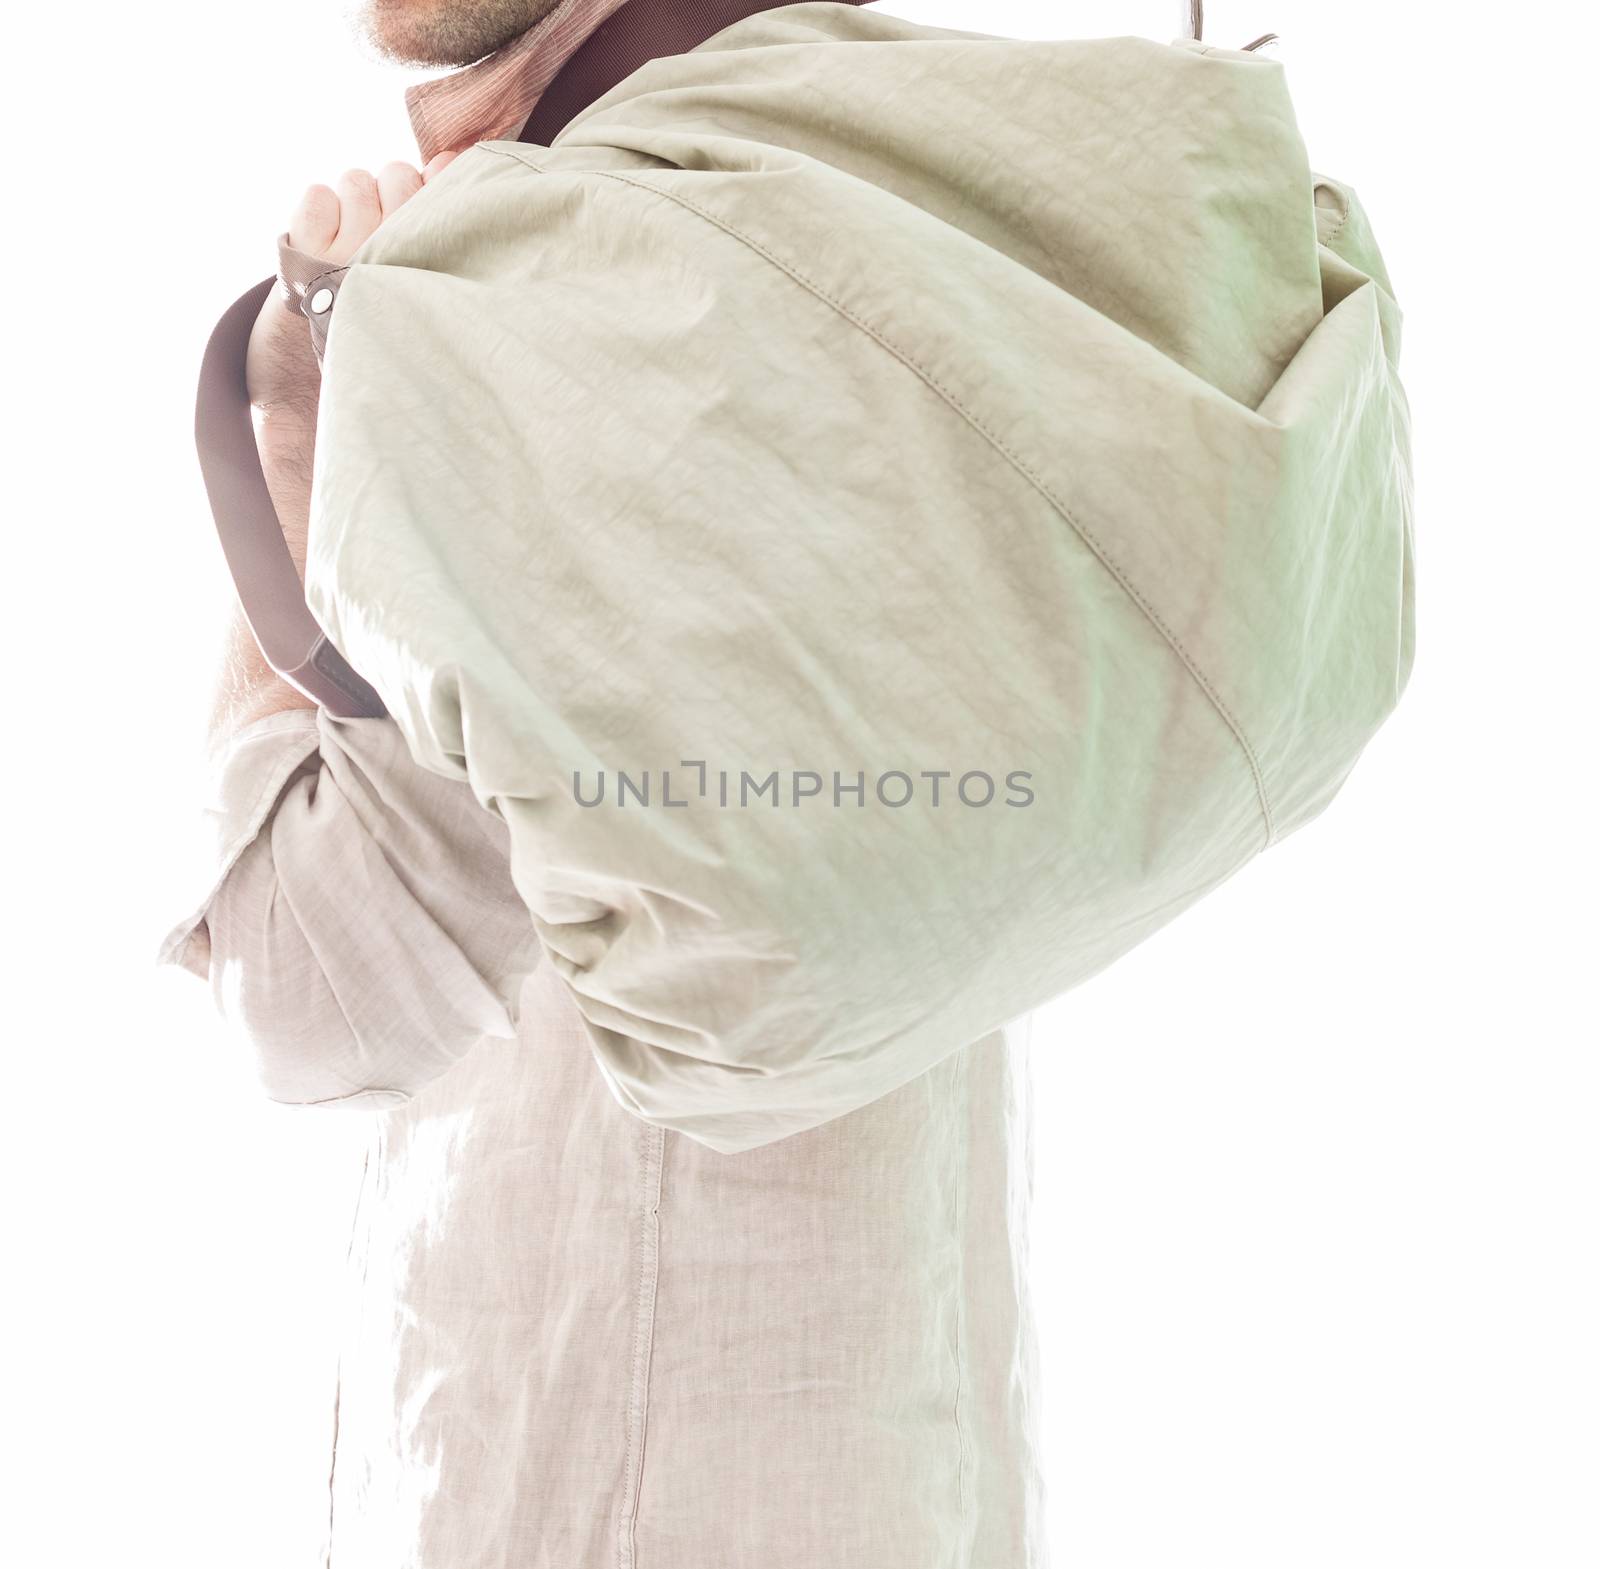 Elegant young handsome man in white clothing and bag. Studio fashion portrait.